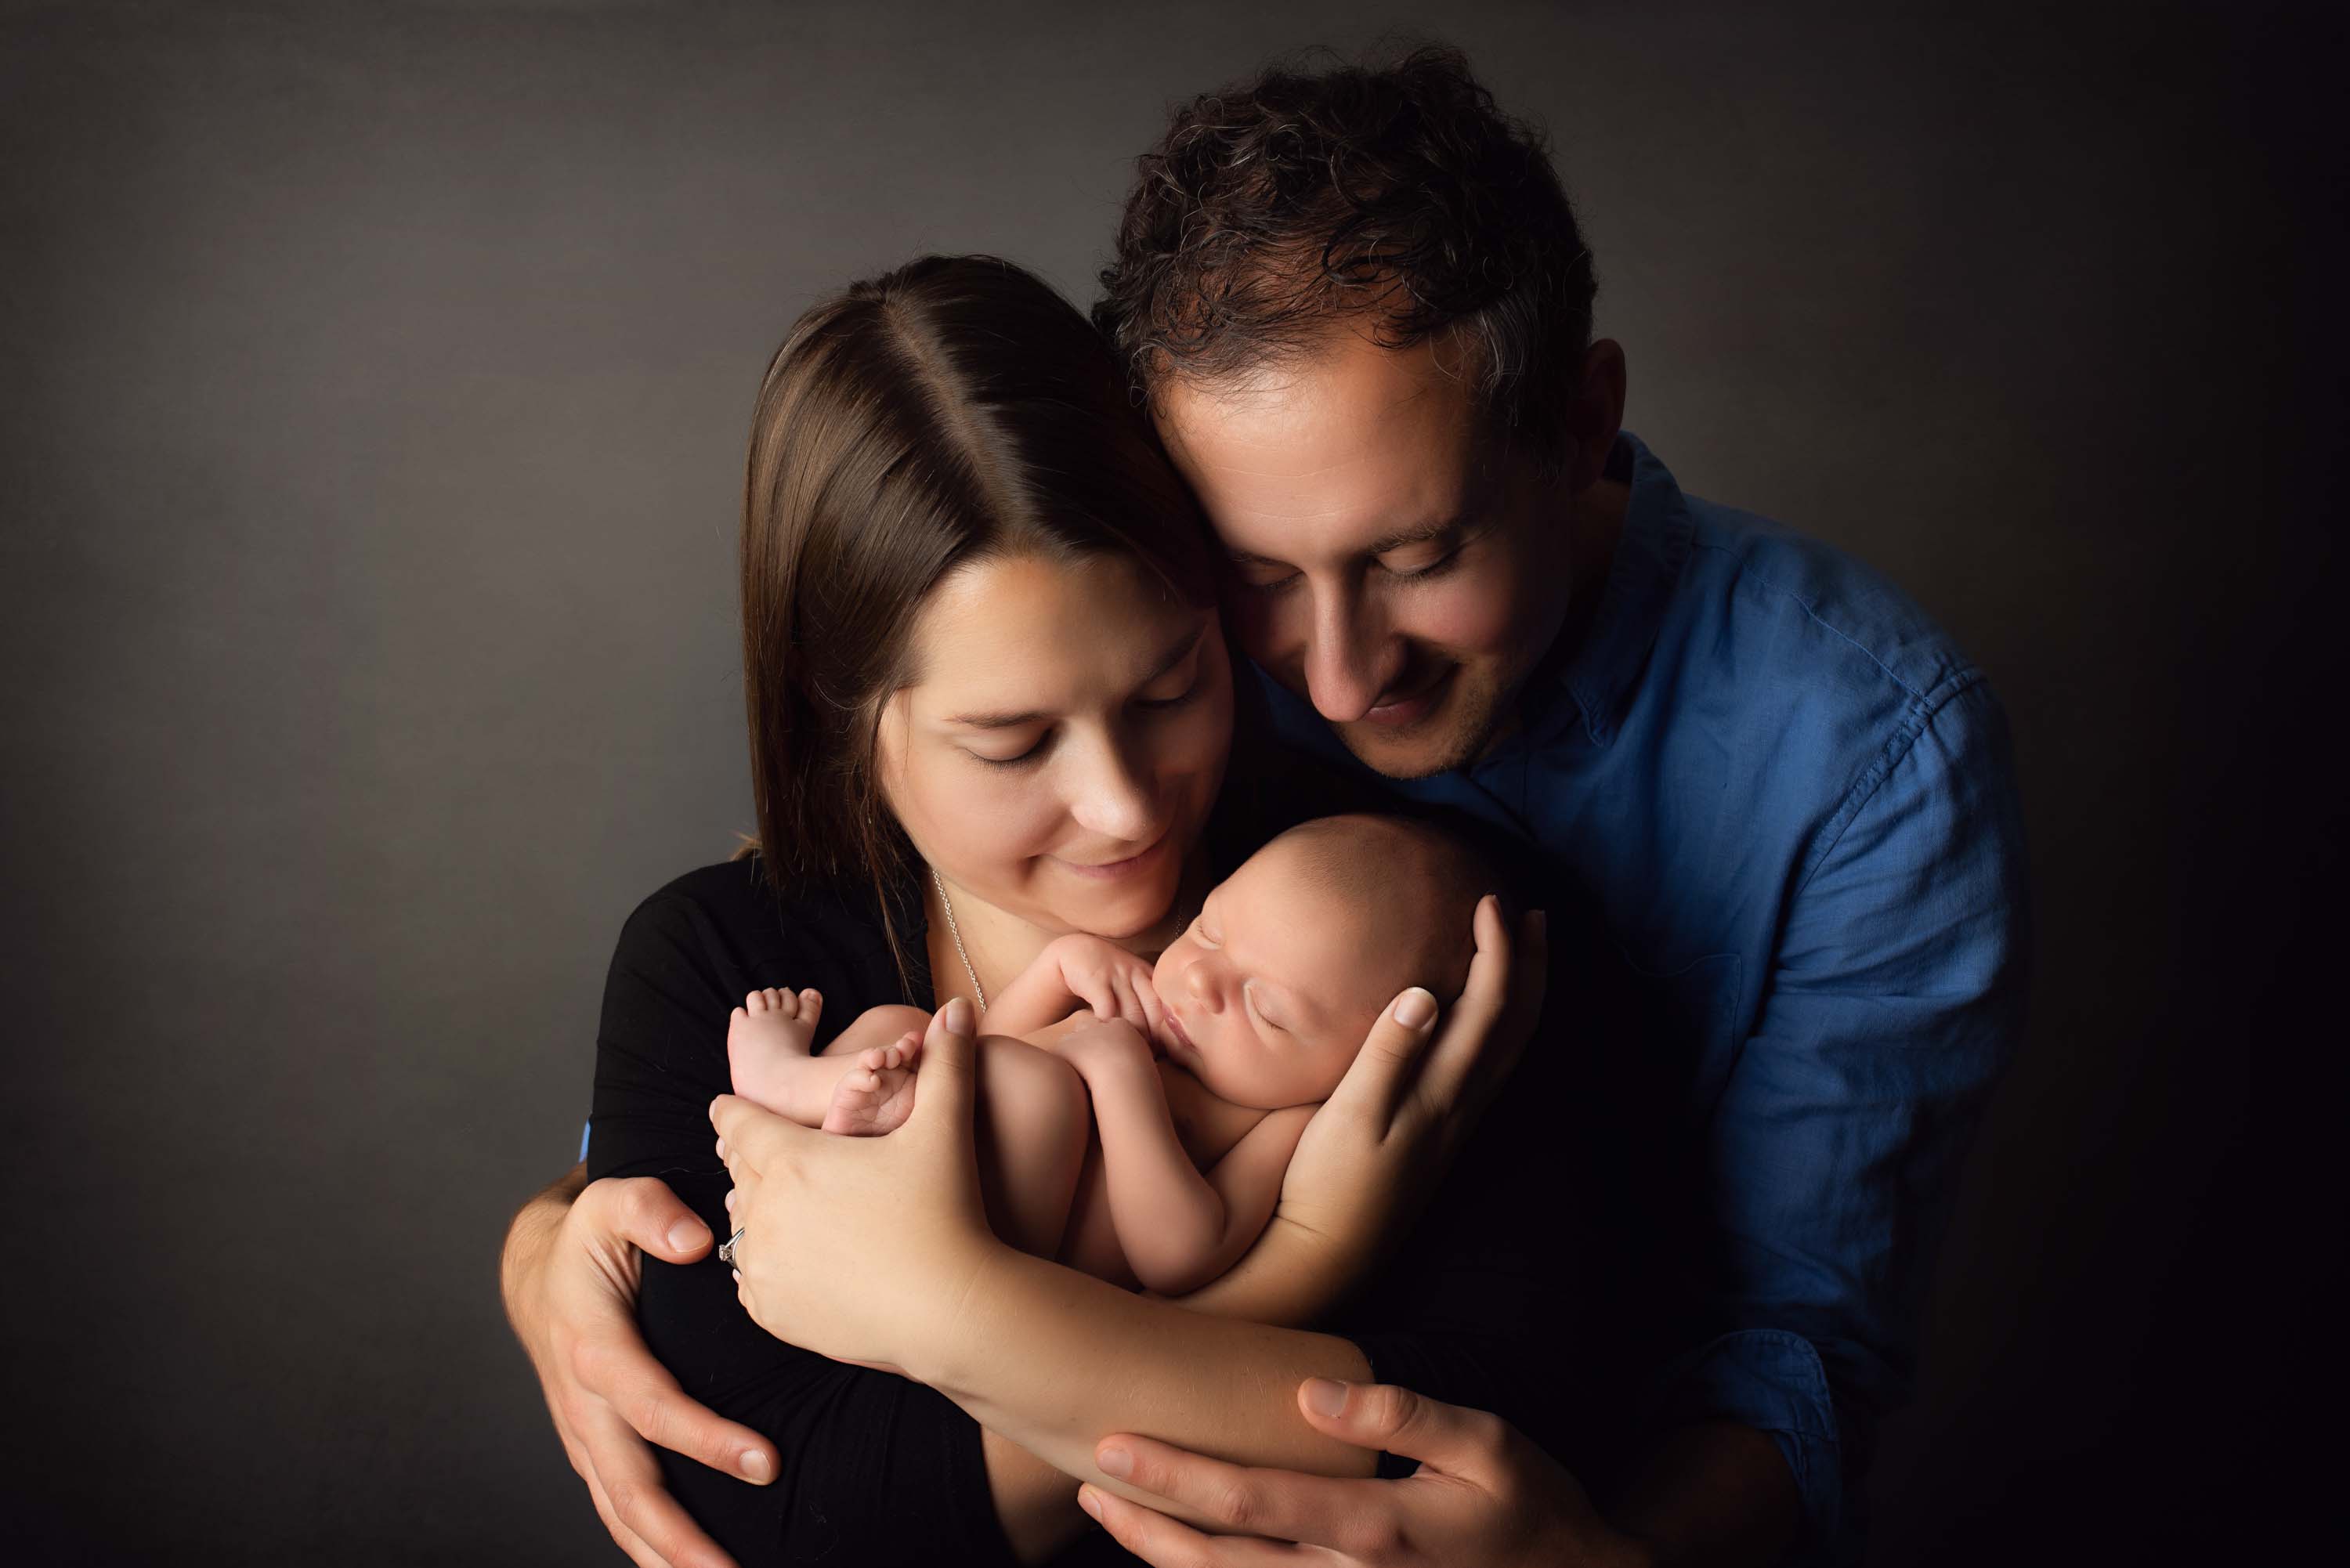 Family photograph with new baby boy being held by adoring mother